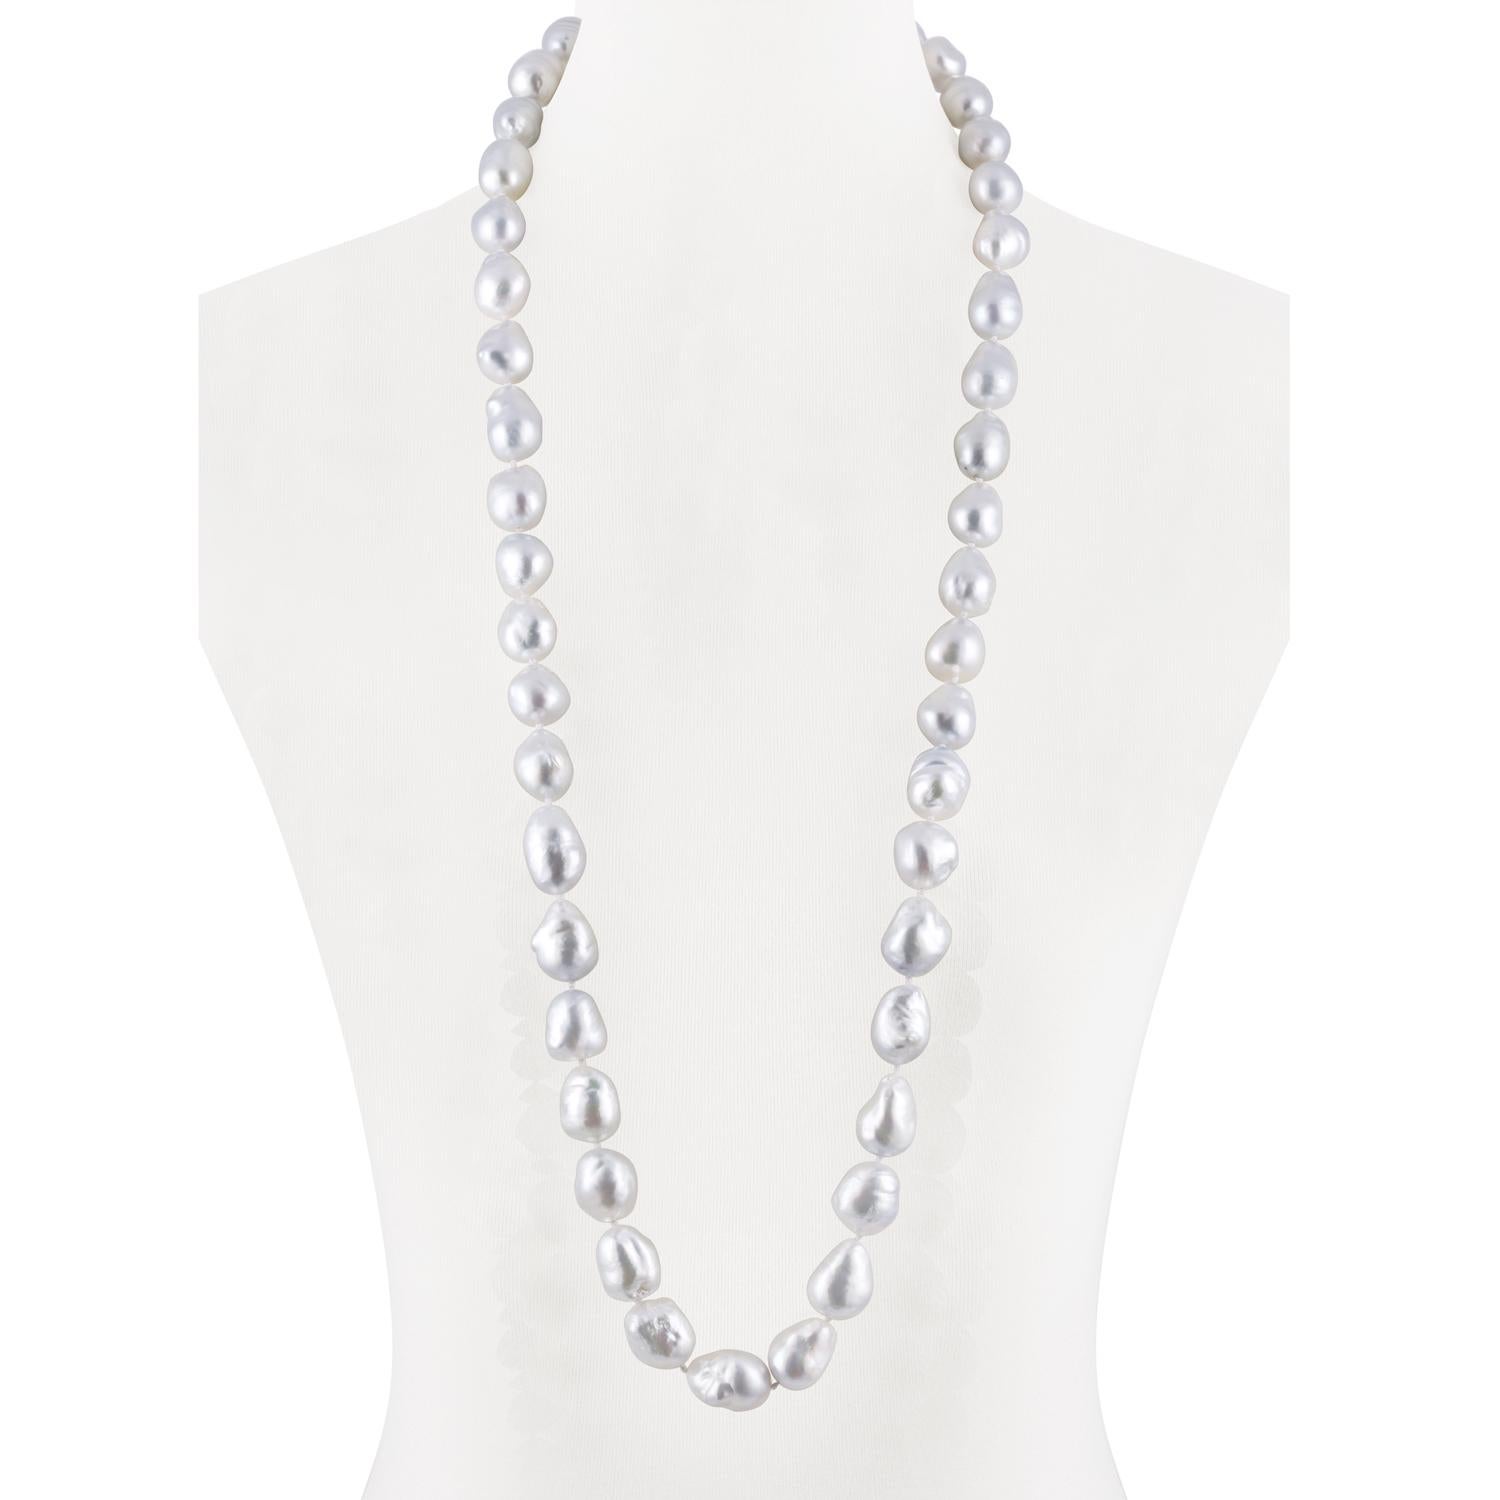 This double length necklace features fine quality South Sea white Baroque cultured pearls measuring 15.1x18mm.
These large, Australian pearls have high luster and are perfectly matched.   
Their organic, baroque shapes are interesting yet